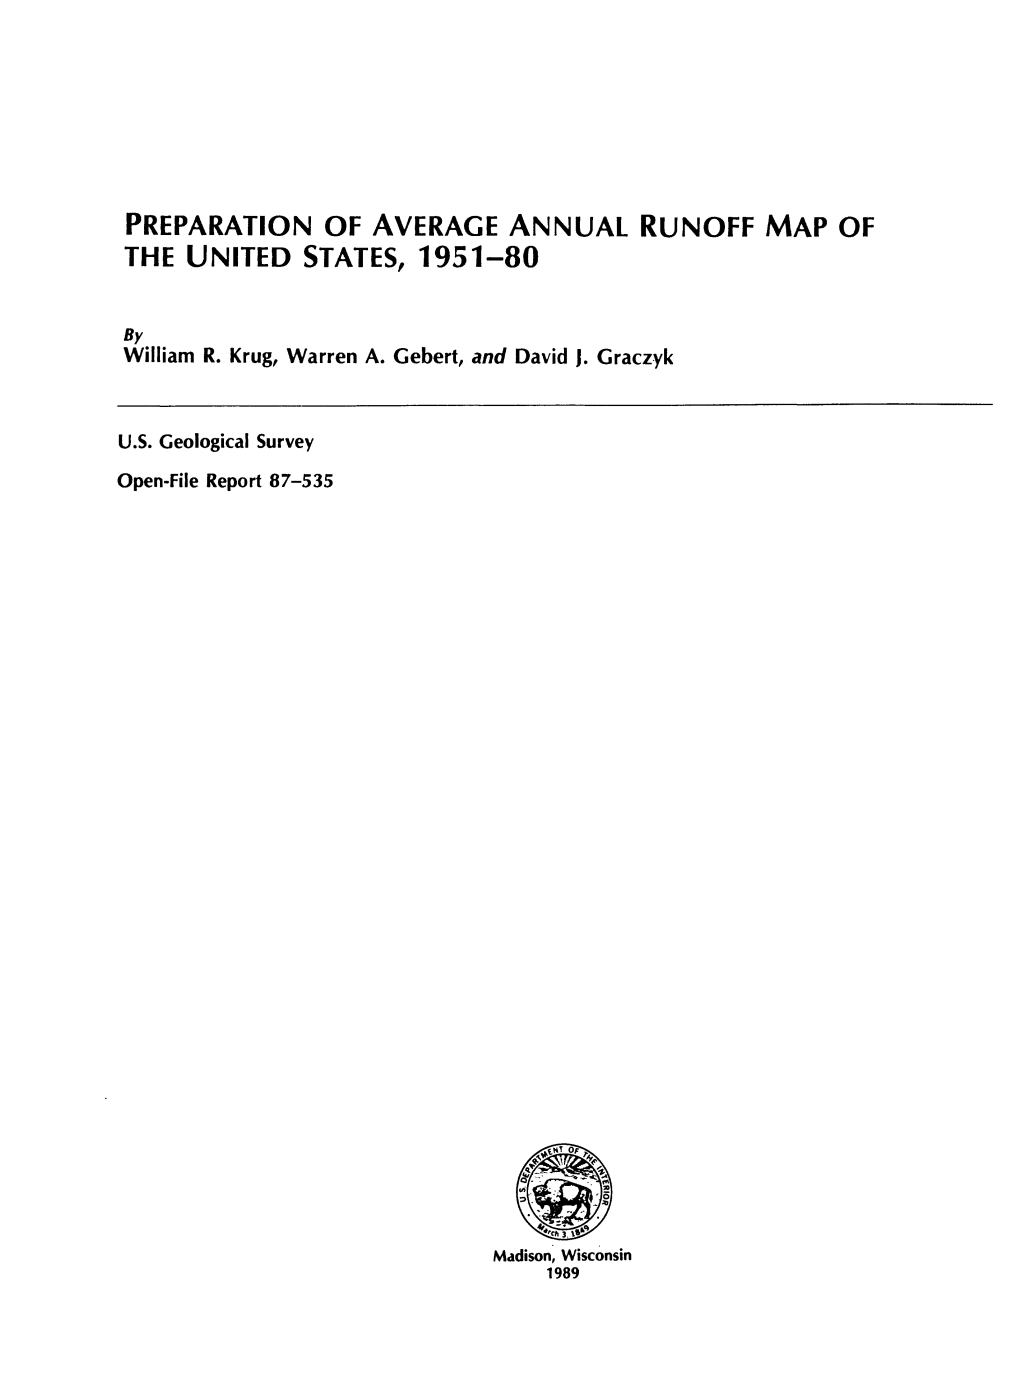 Preparation of Average Annual Runoff Map of the United States, 1951-80